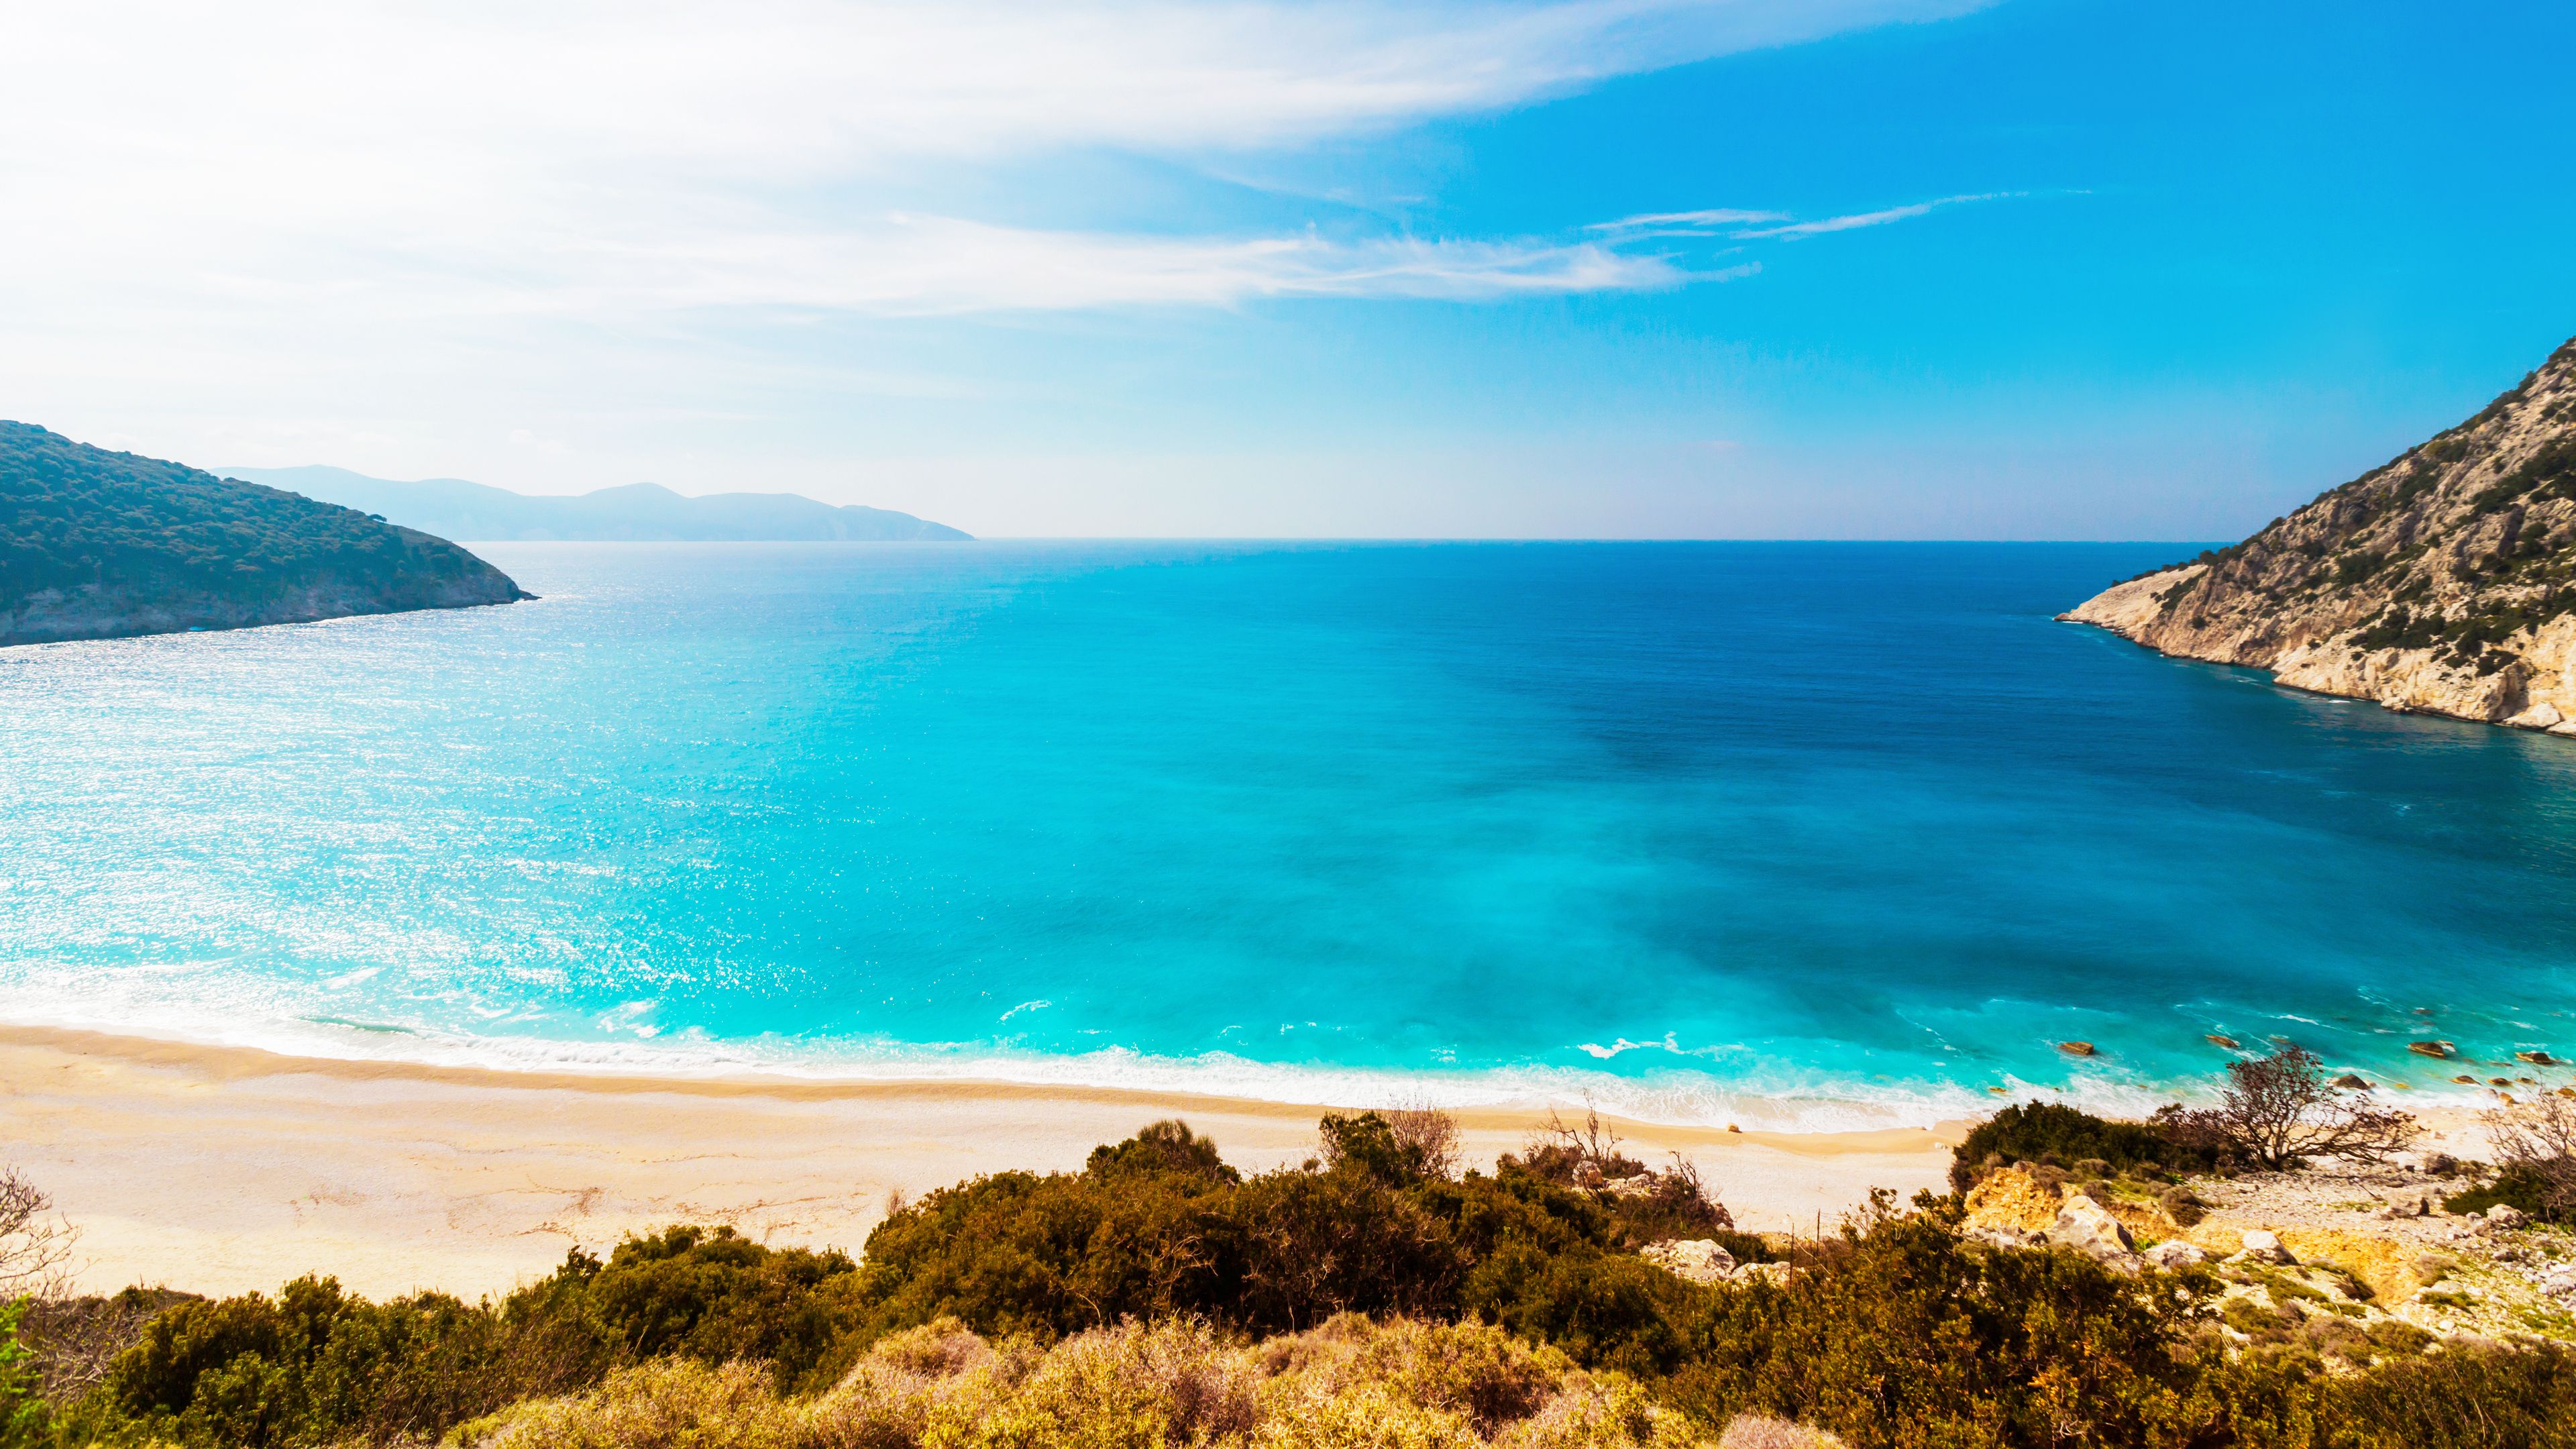 A beach with water and mountains in the background - Ocean